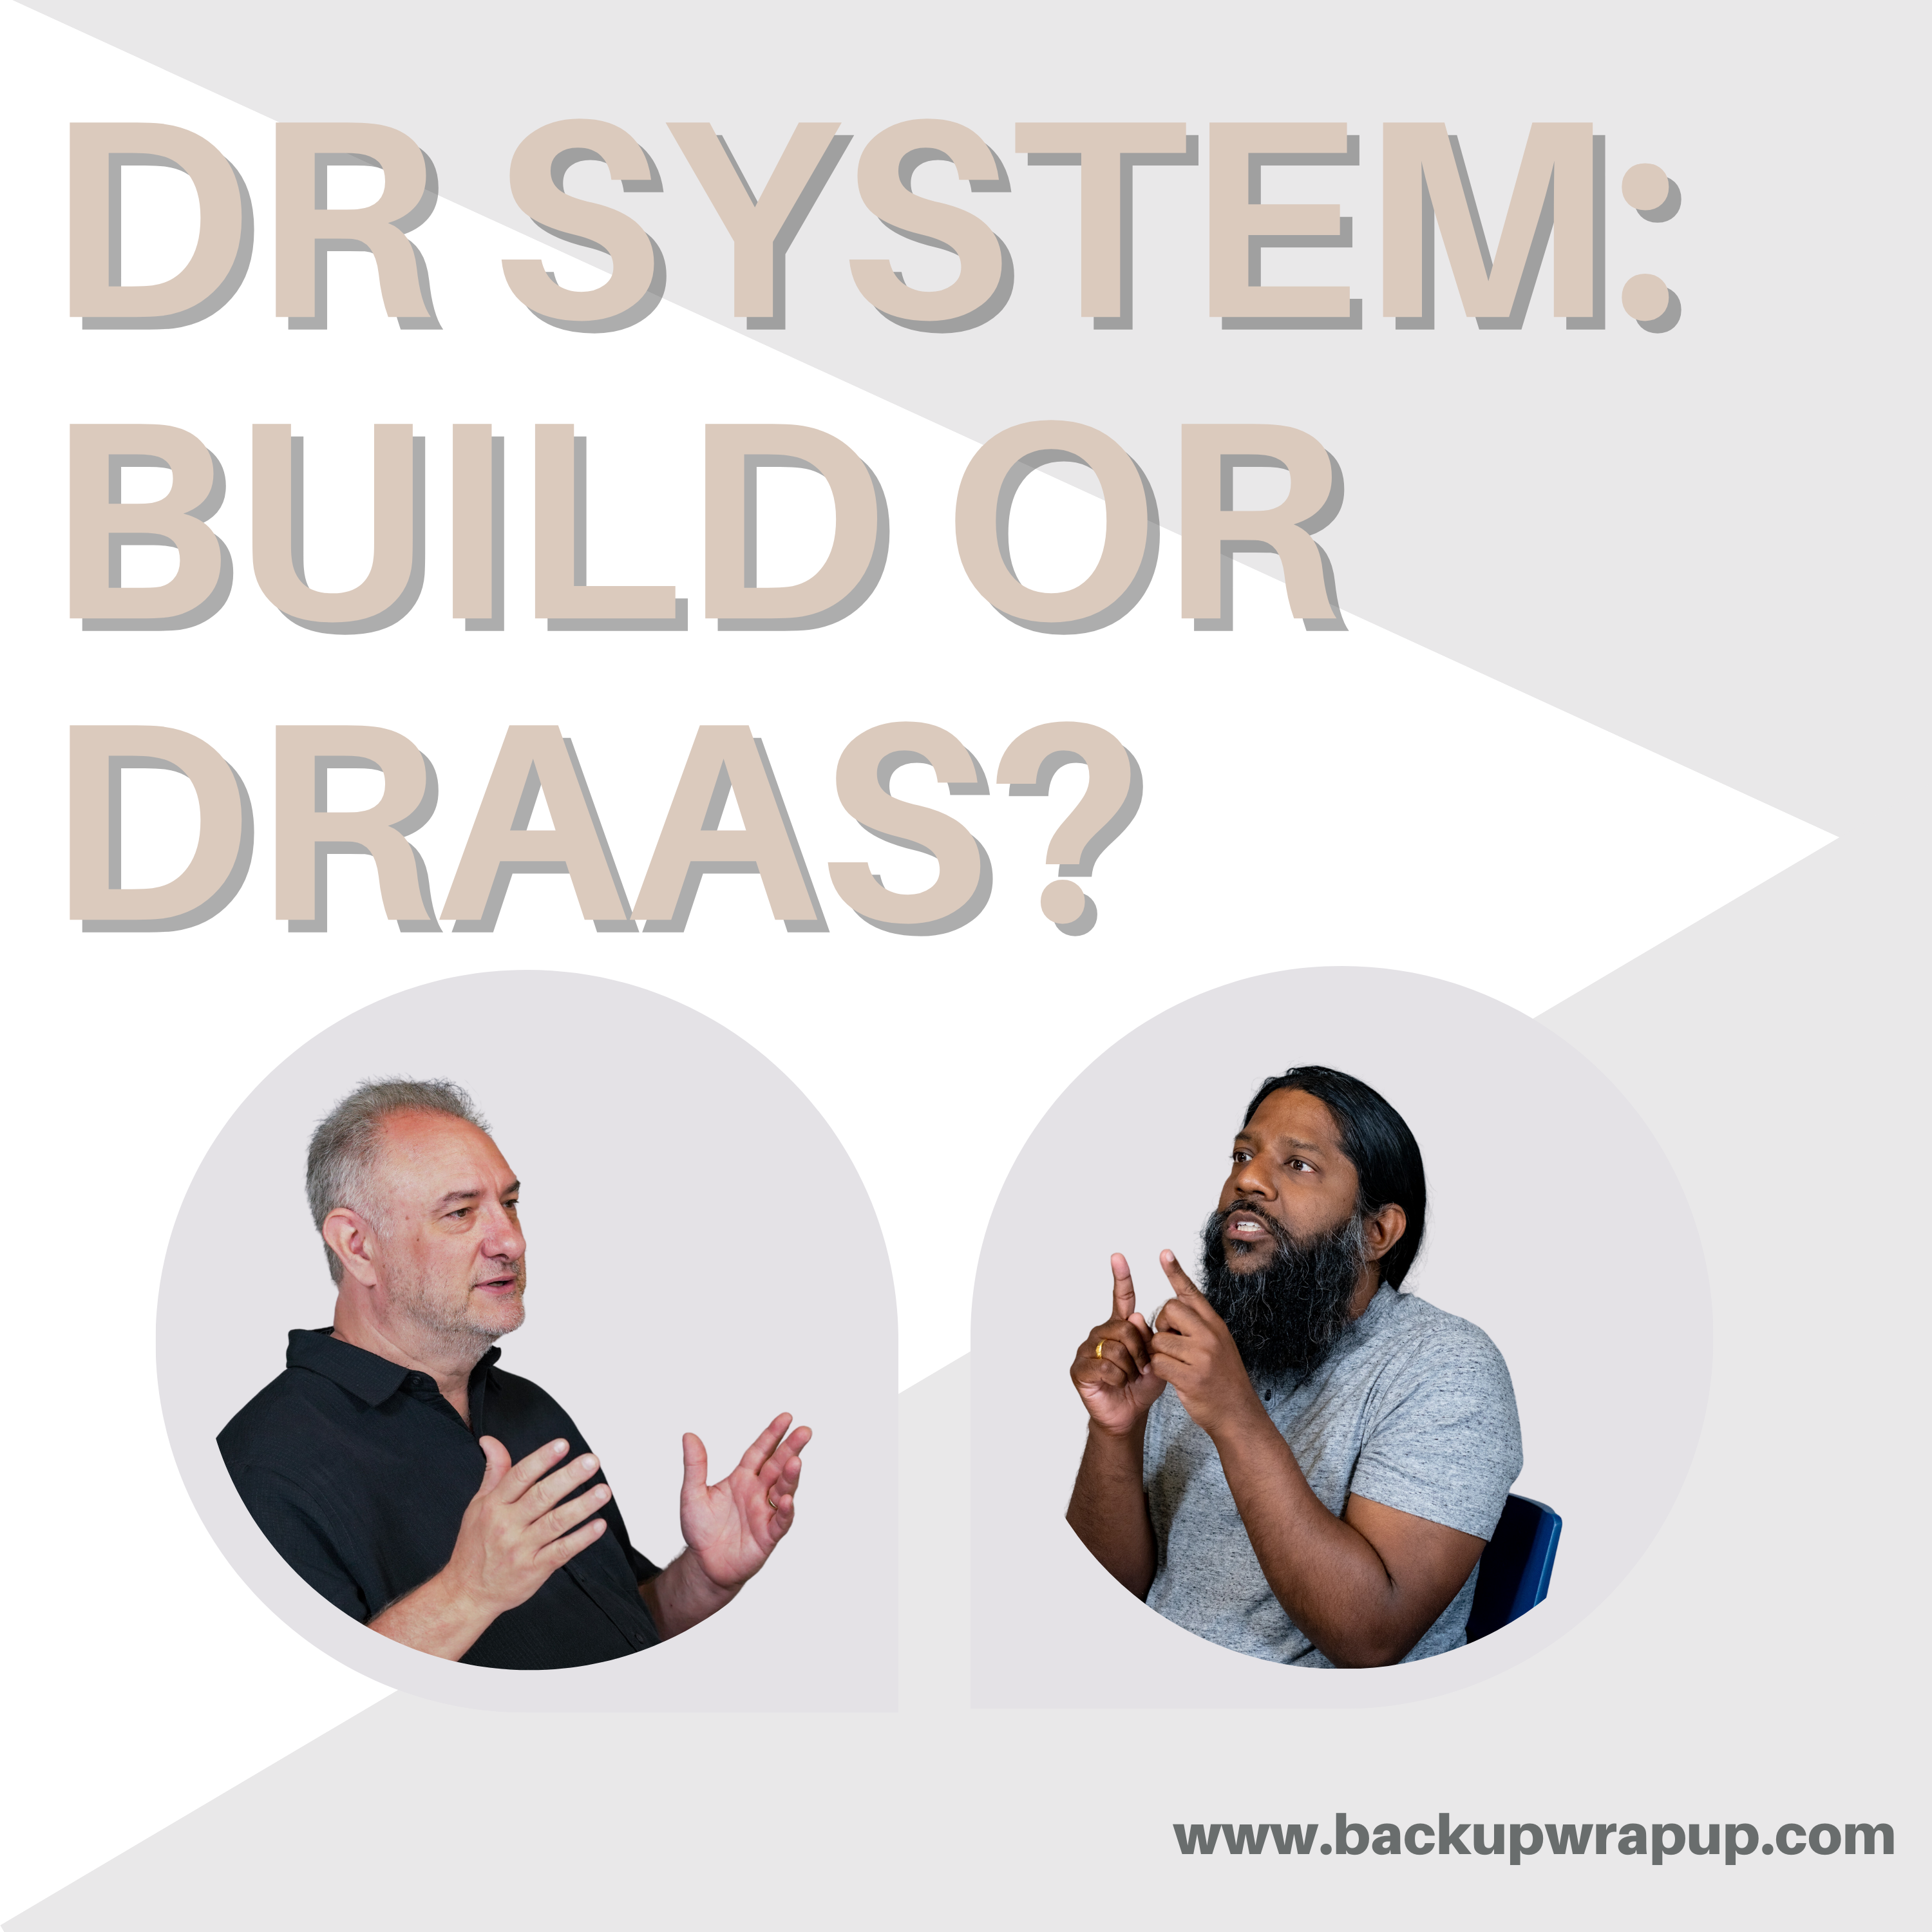 To DRaaS or Not to DRaaS? Comparing Disaster Recovery Approaches